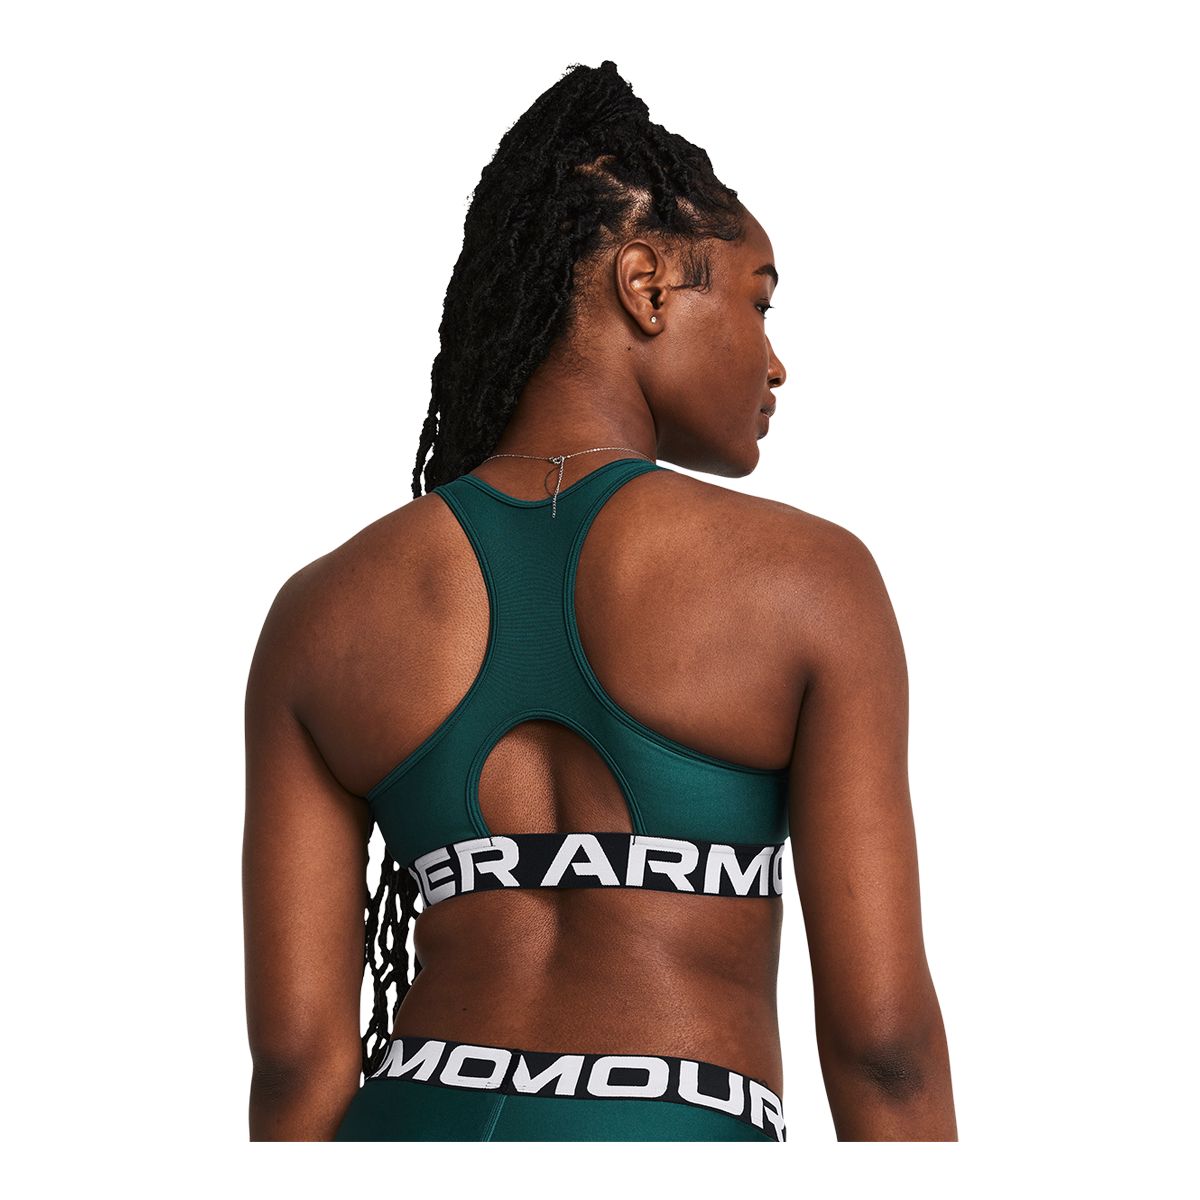 https://media-www.sportchek.ca/product/div-03-softgoods/dpt-70-athletic-clothing/sdpt-02-womens/334264472/under-armour-women-s-heatgear-armour-mid-sports-bra-0fa73cf1-f874-4e24-b167-2d34bd14ced0-jpgrendition.jpg?imdensity=1&imwidth=1244&impolicy=mZoom